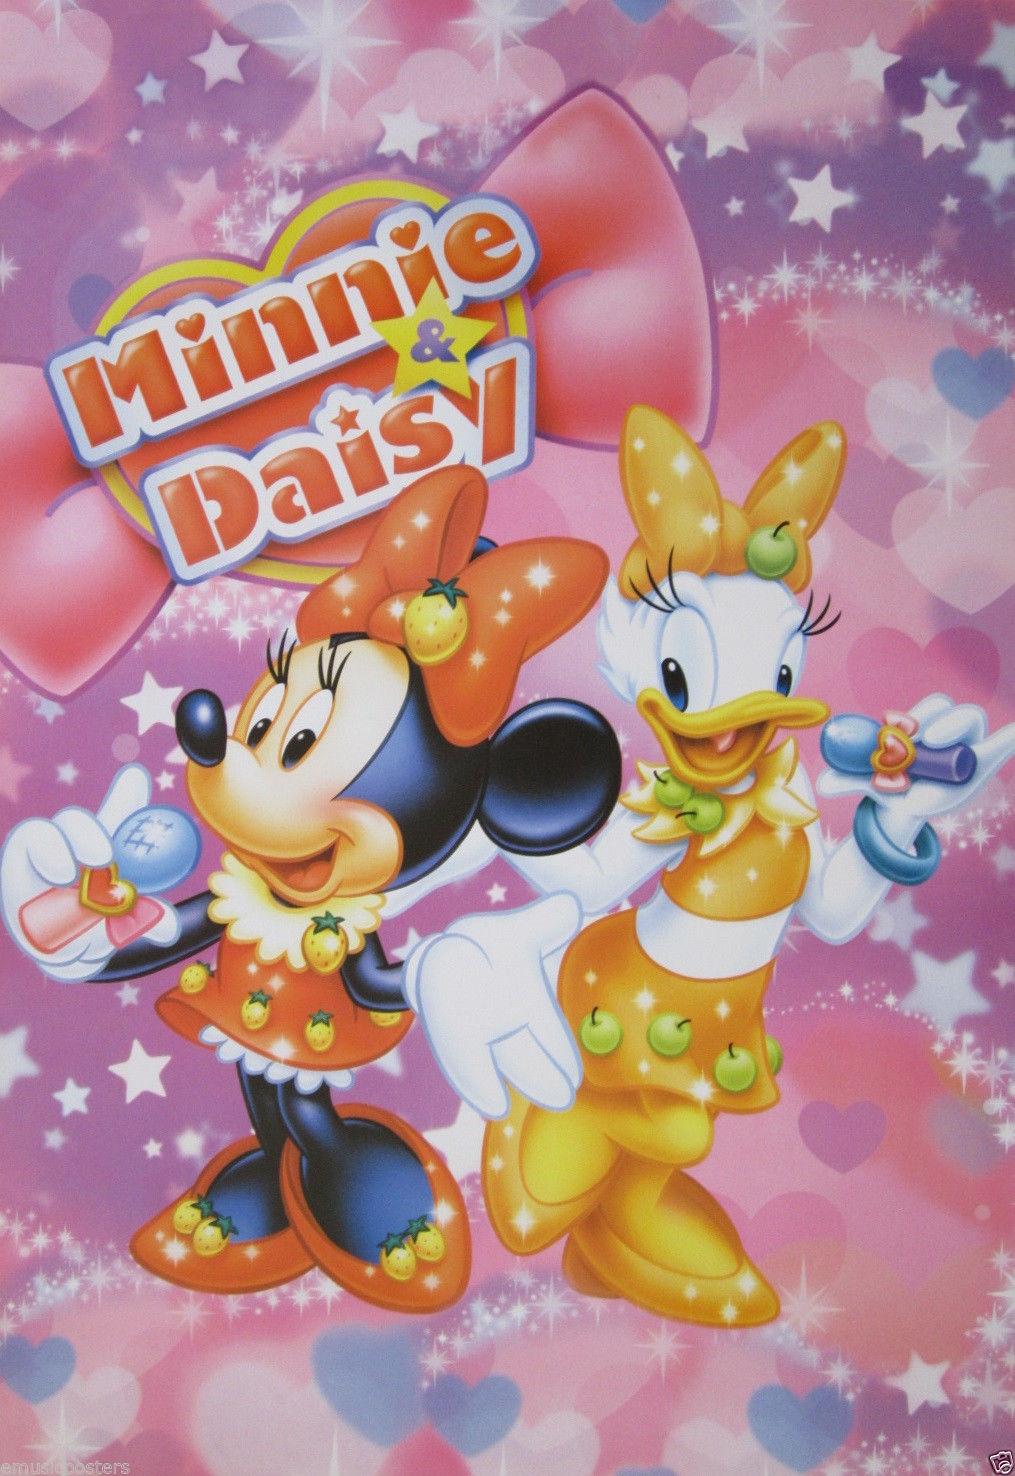 Free download images disney minnie mouse and daisy duck wallpapers